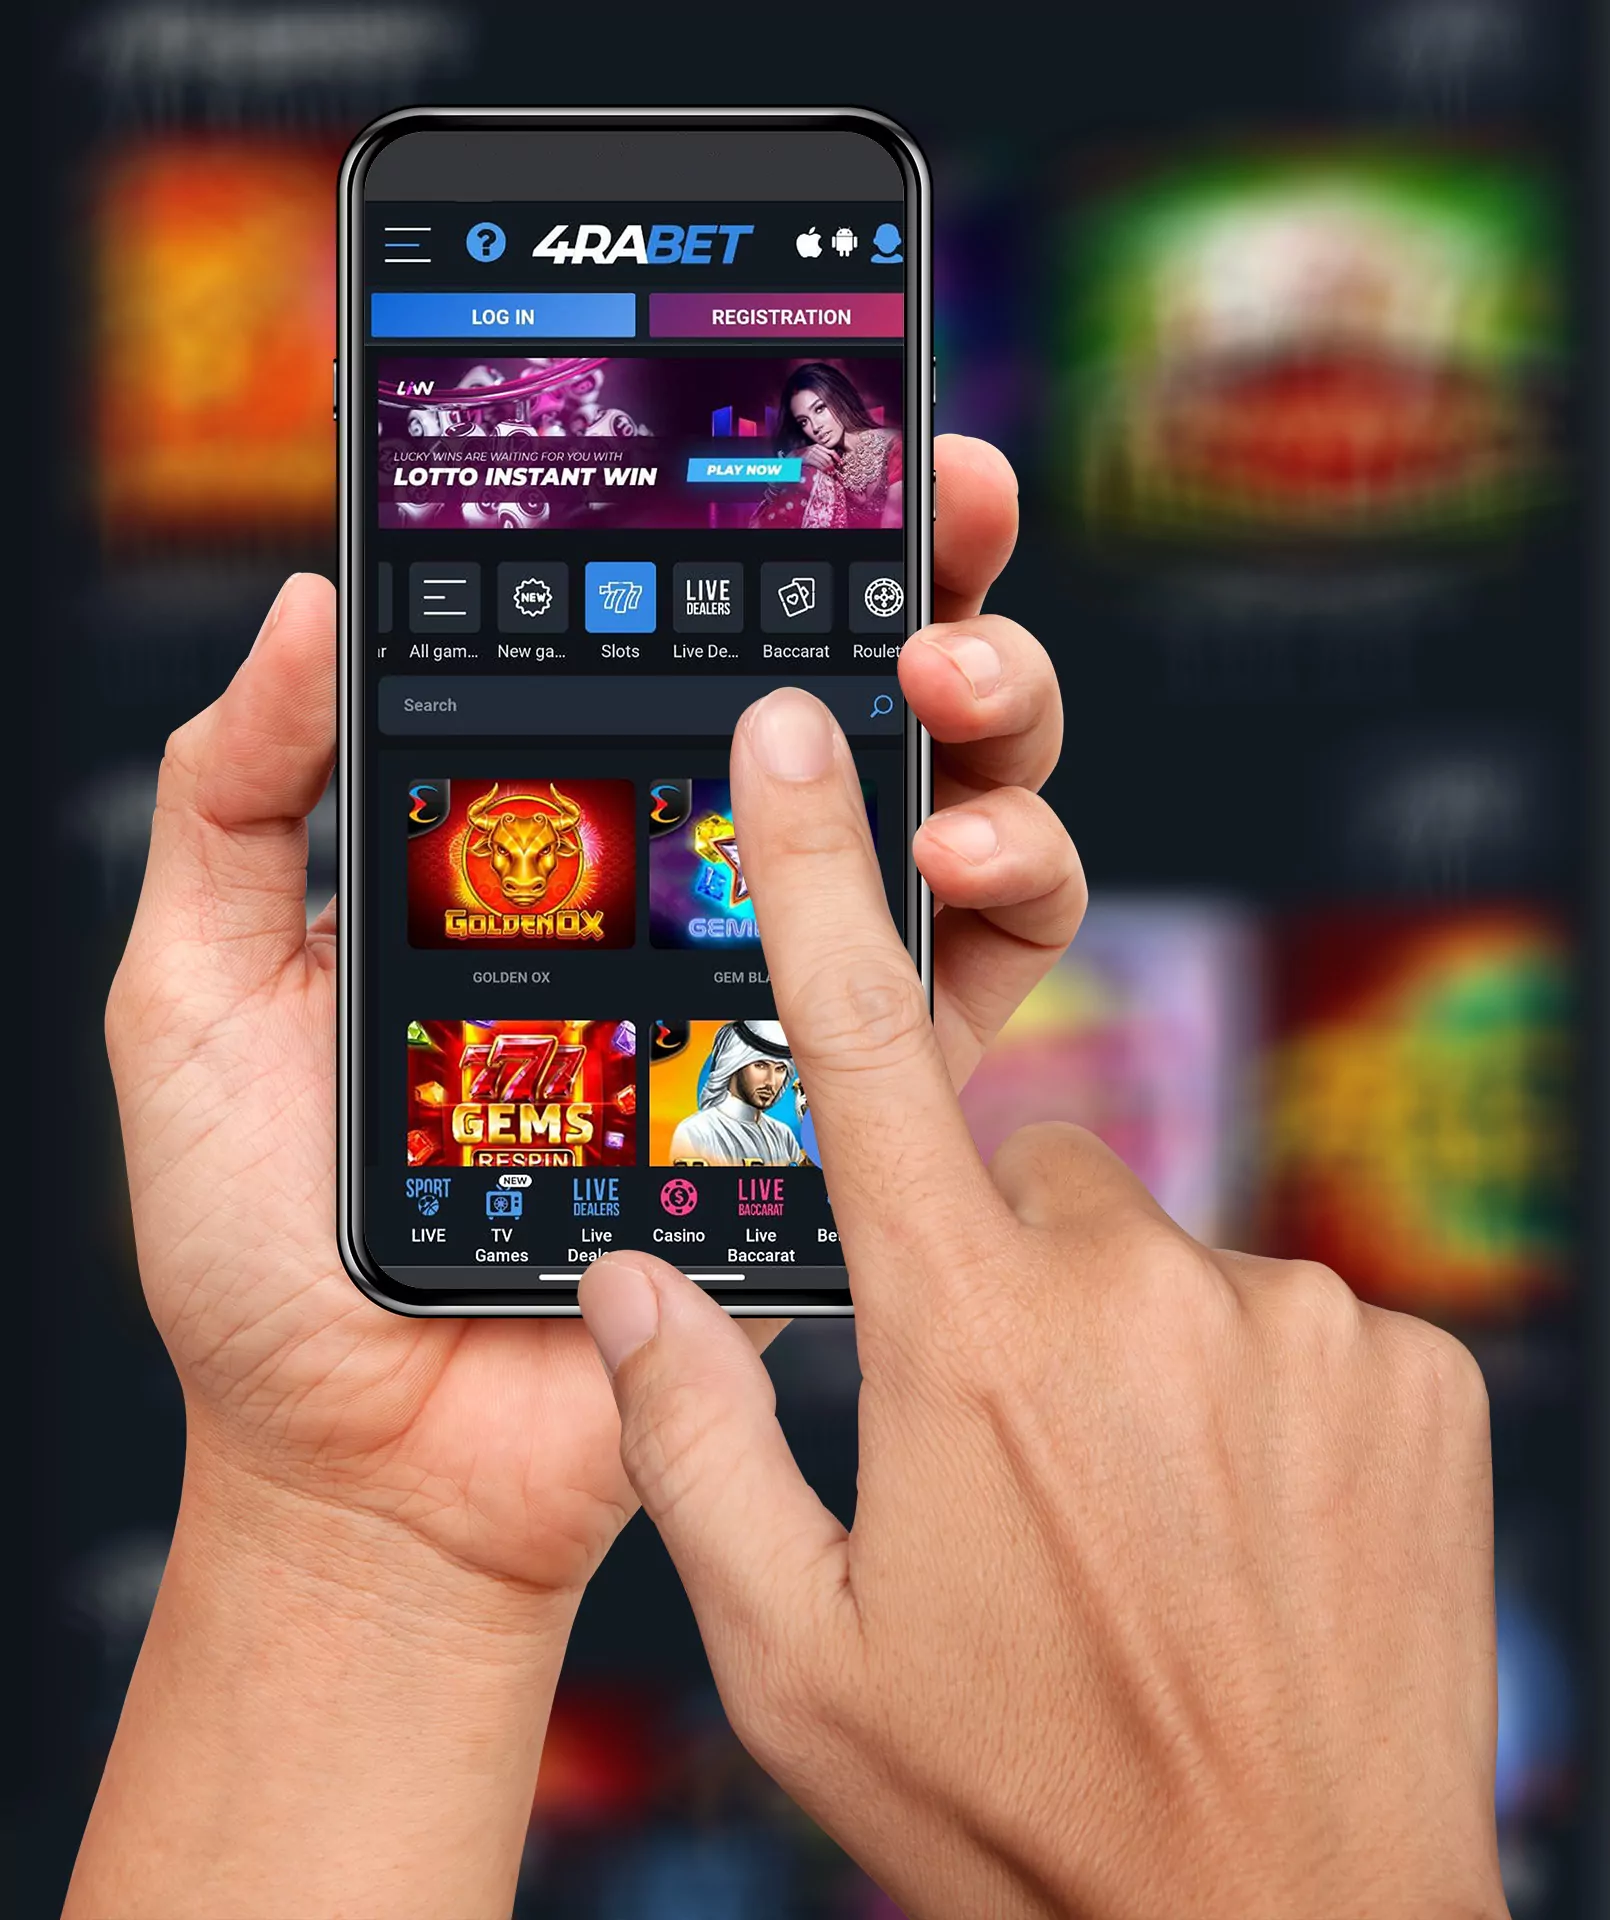 You can also play casino games via the 4rabet mobile app.